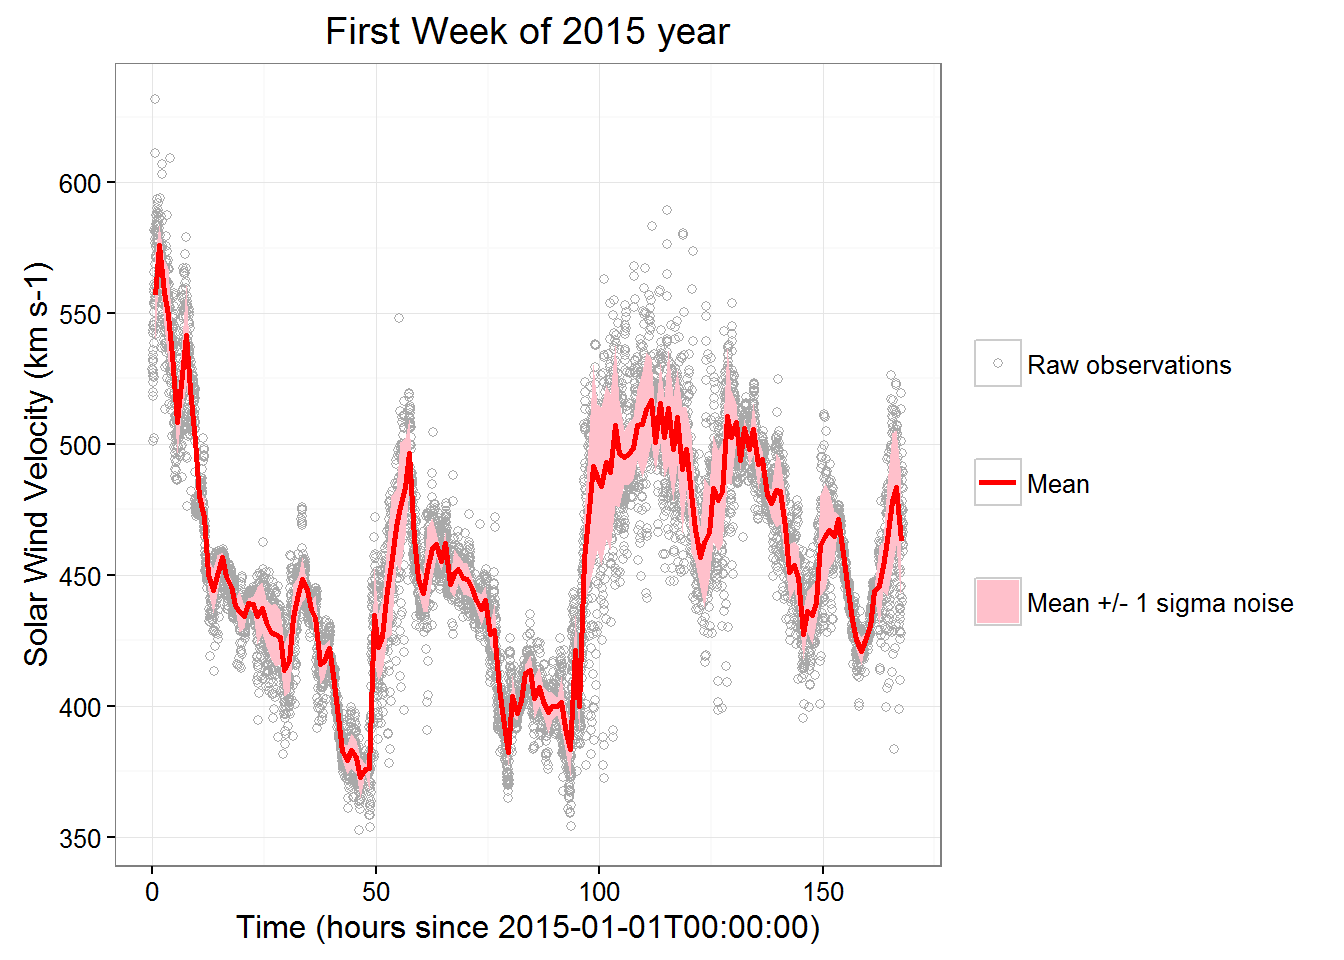 solar wind observations - velocity: first week of 2015